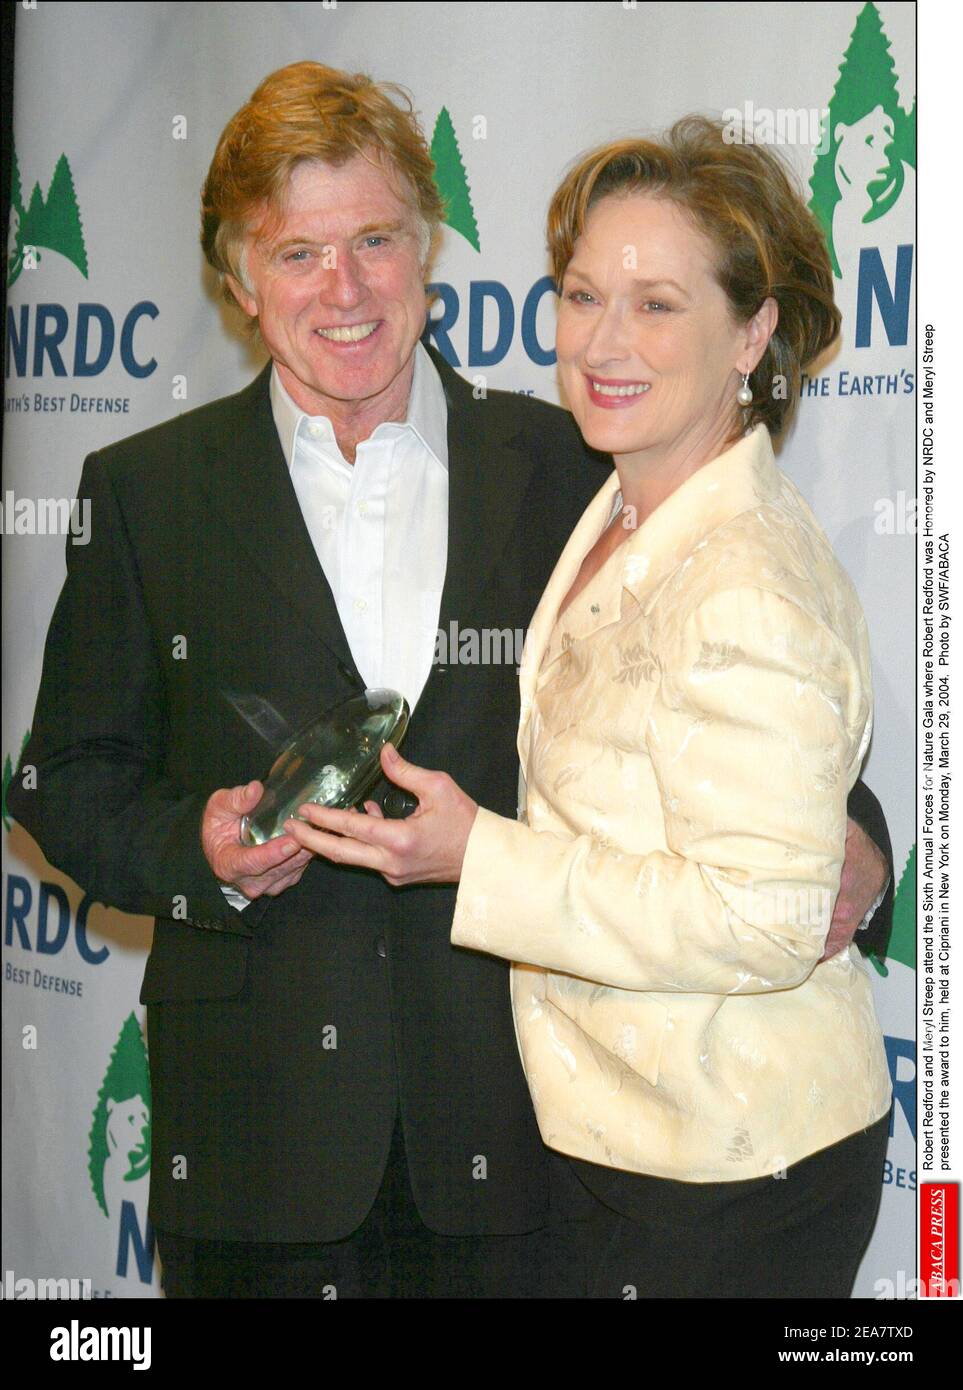 Robert Redford and Meryl Streep attend the Sixth Annual Forces for Nature  Gala where Robert Redford was Honored by NRDC and Meryl Streep presented  the award to him, held at Cipriani in